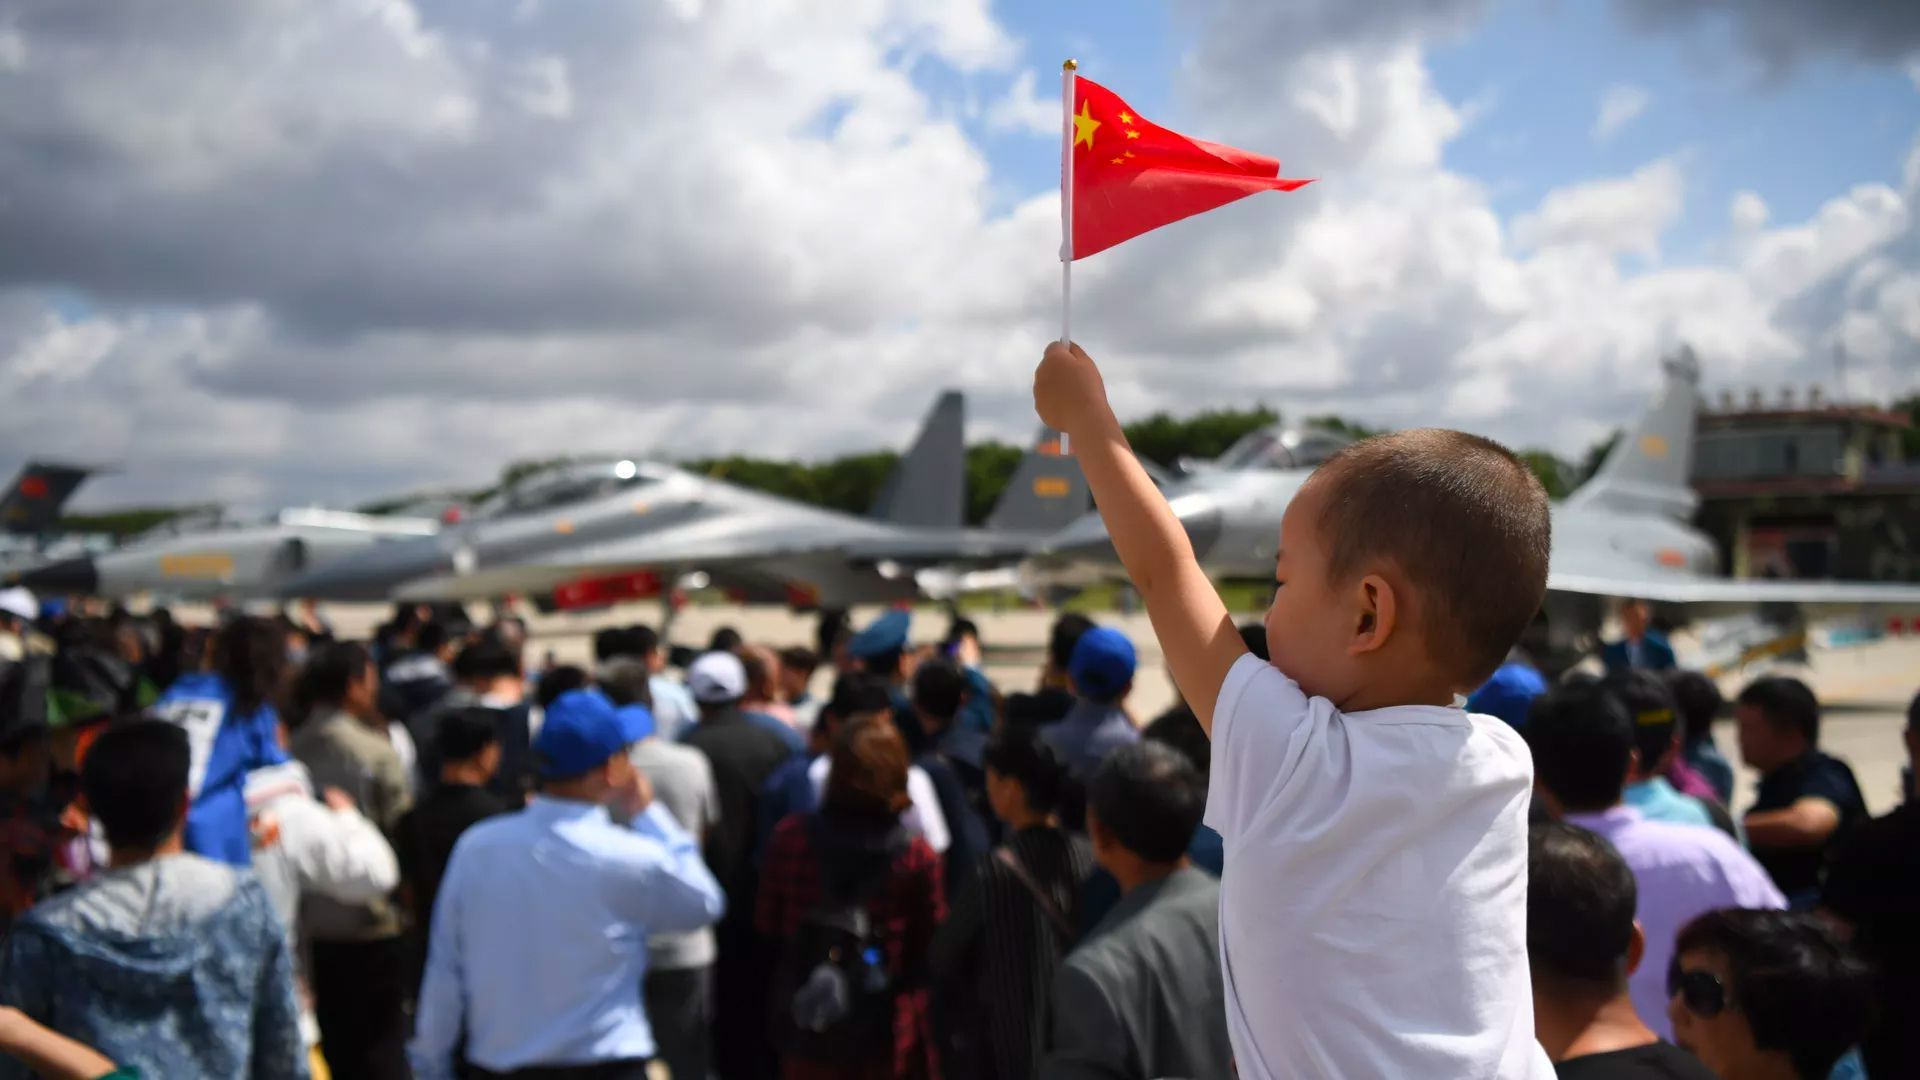 A little Chinese boy hoding a Chinese flag at an airbase surrounded by people. 